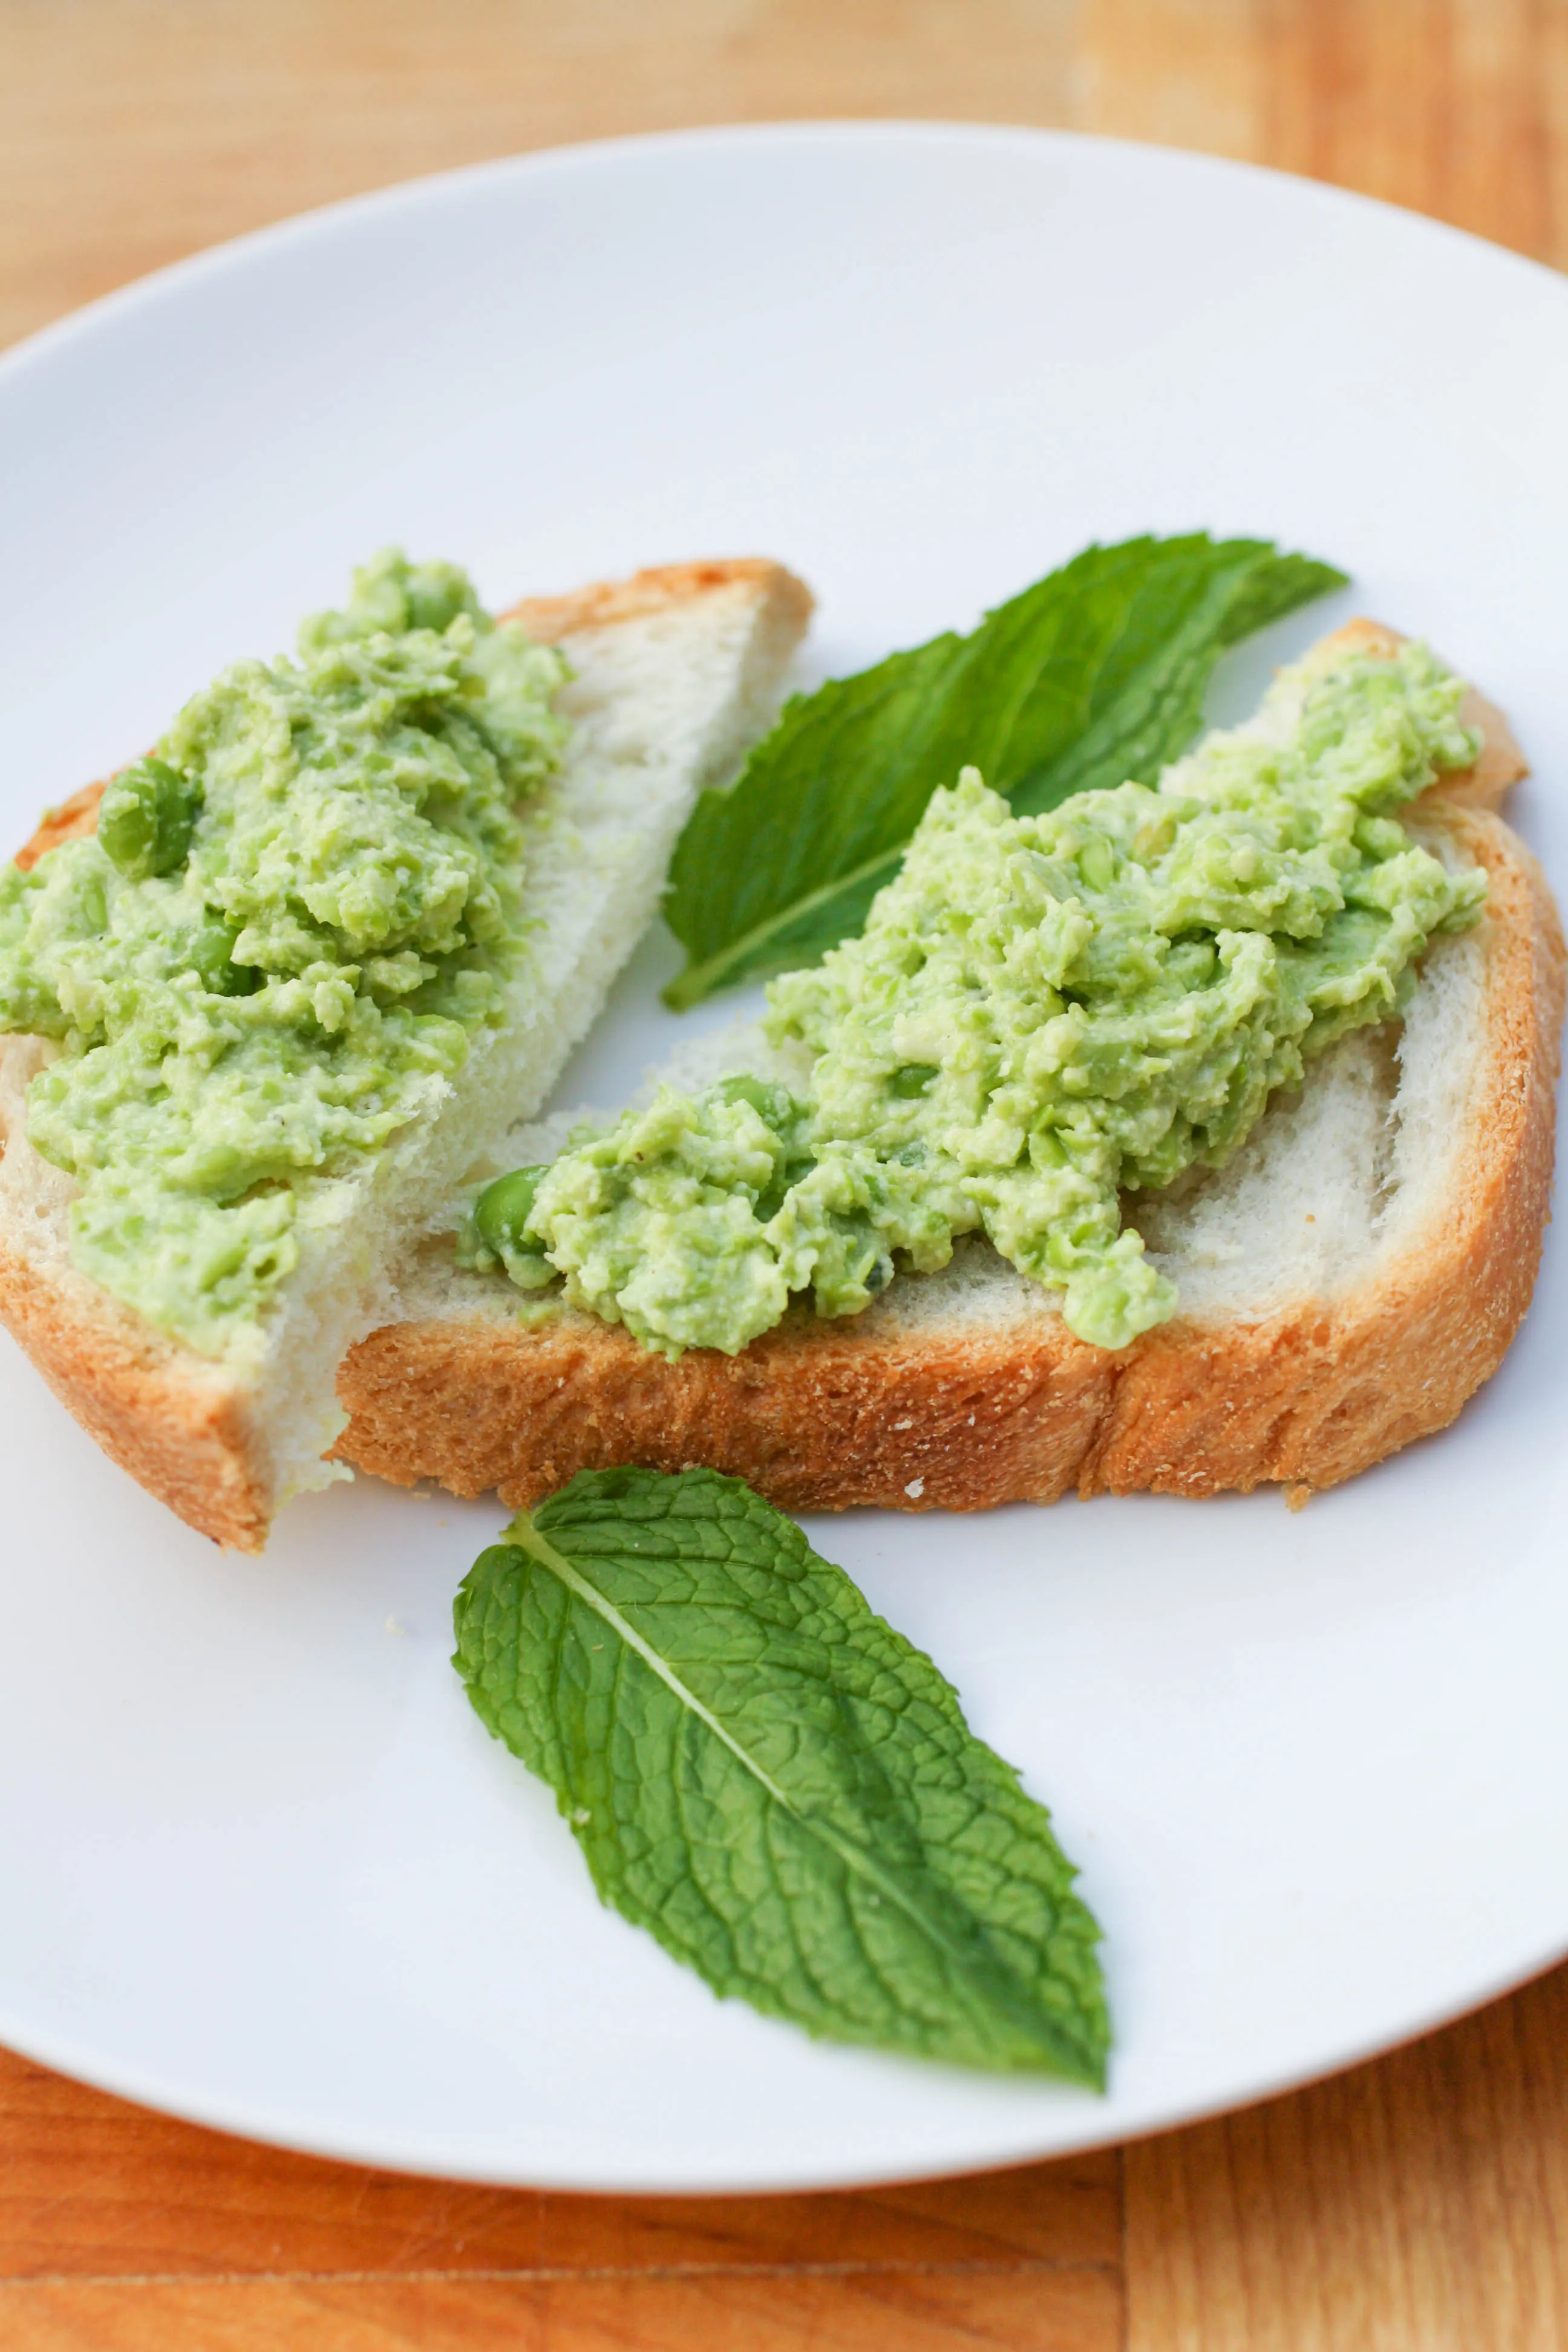 Pea and Ricotta Spread makes the perfect spring appetizer. Pea and Ricotta Spread is a nice appetizer to serve at Easter, or any get together during the season.